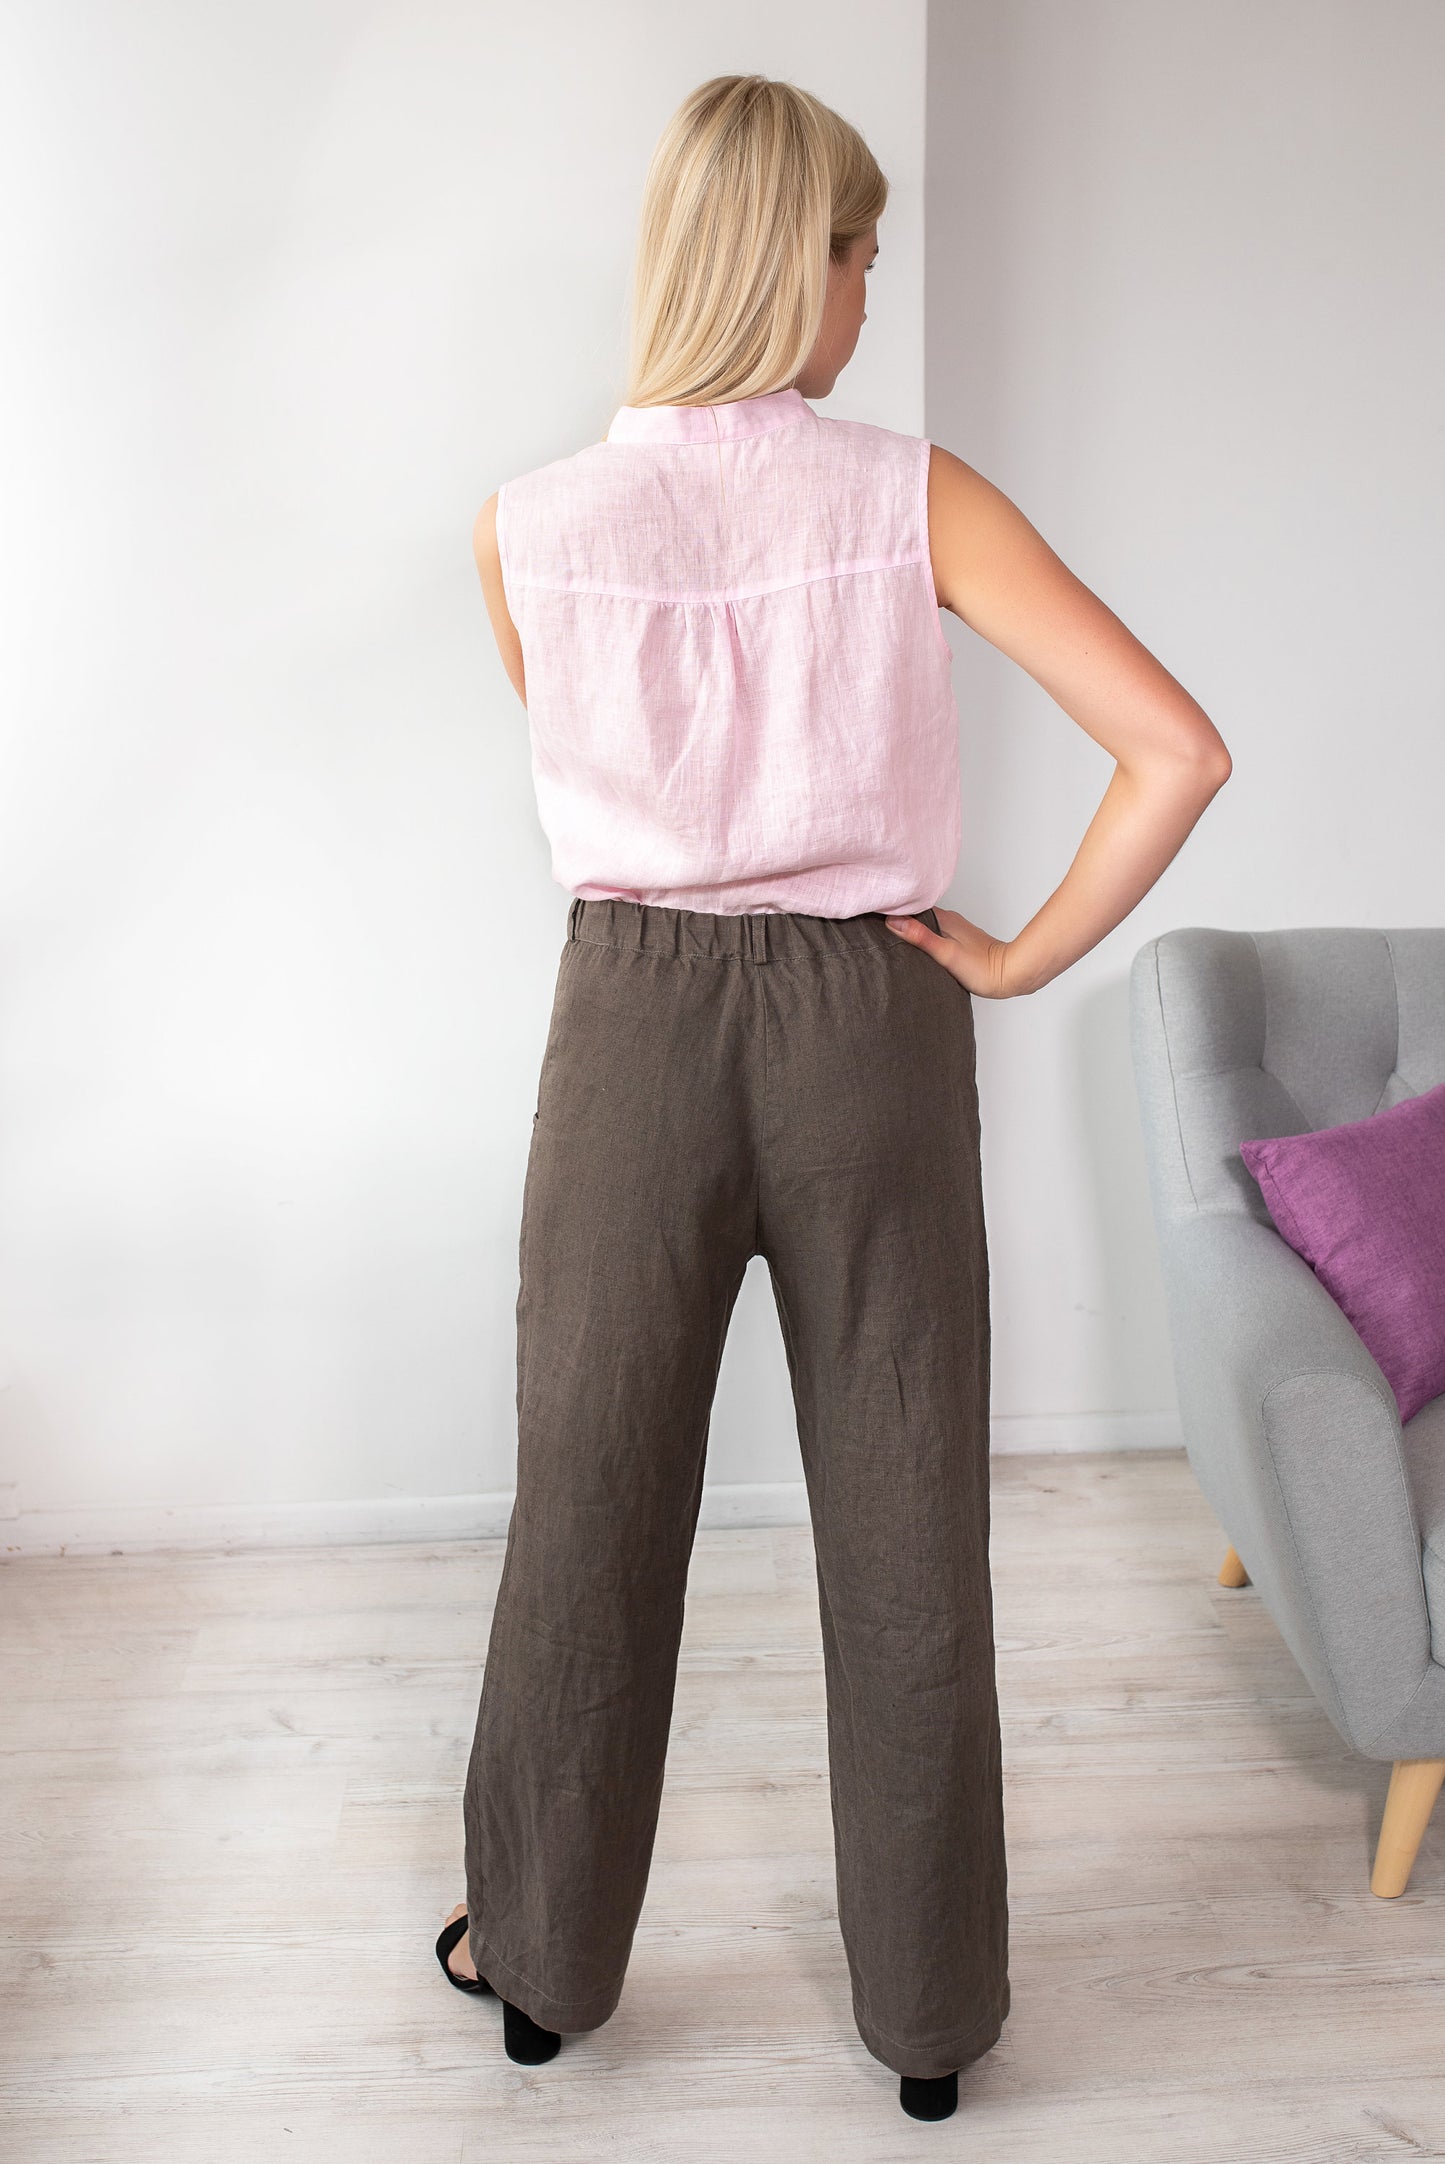 Linen Blouse JULIA Sleeveless With Front Bow